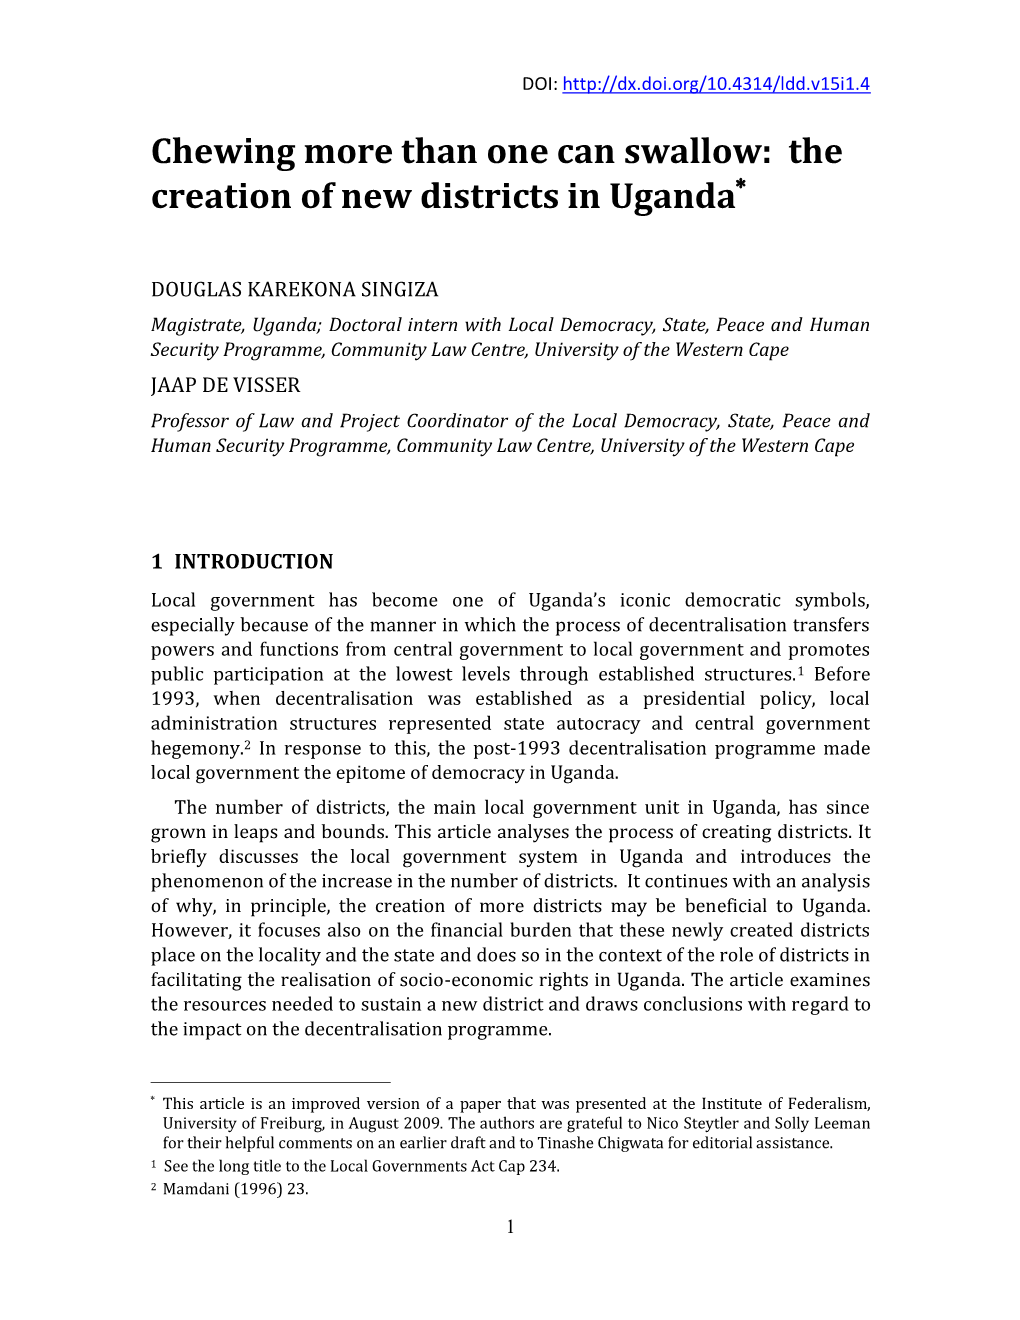 Chewing More Than One Can Swallow: the Creation of New Districts in Uganda